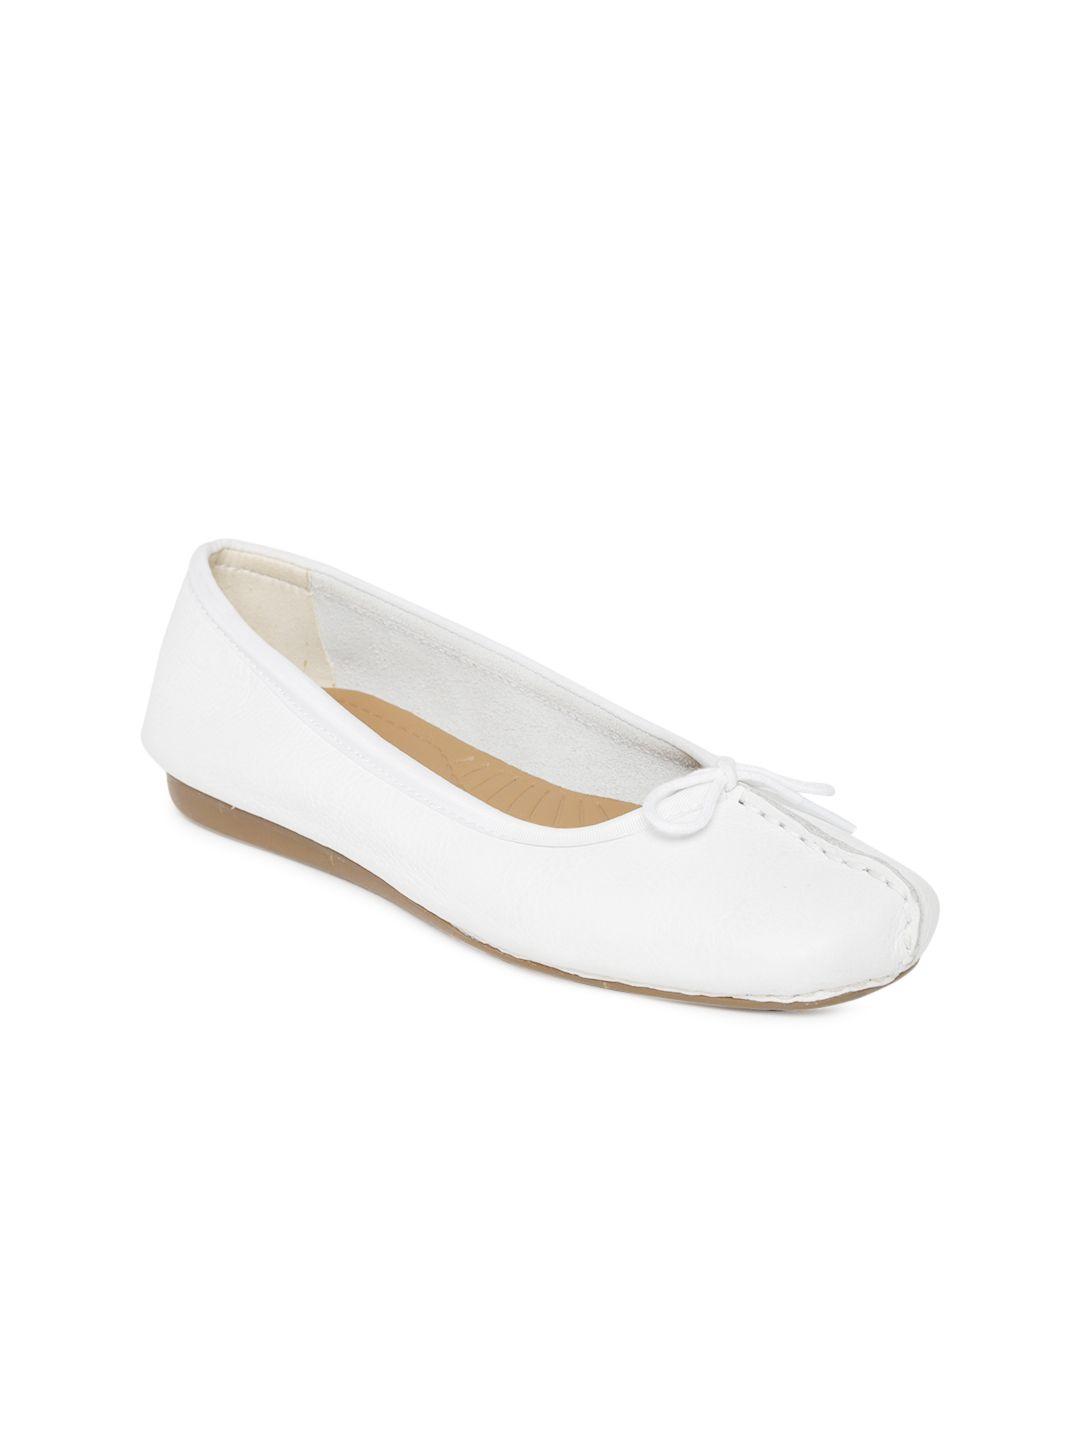 clarks-women-white-leather-flat-shoes